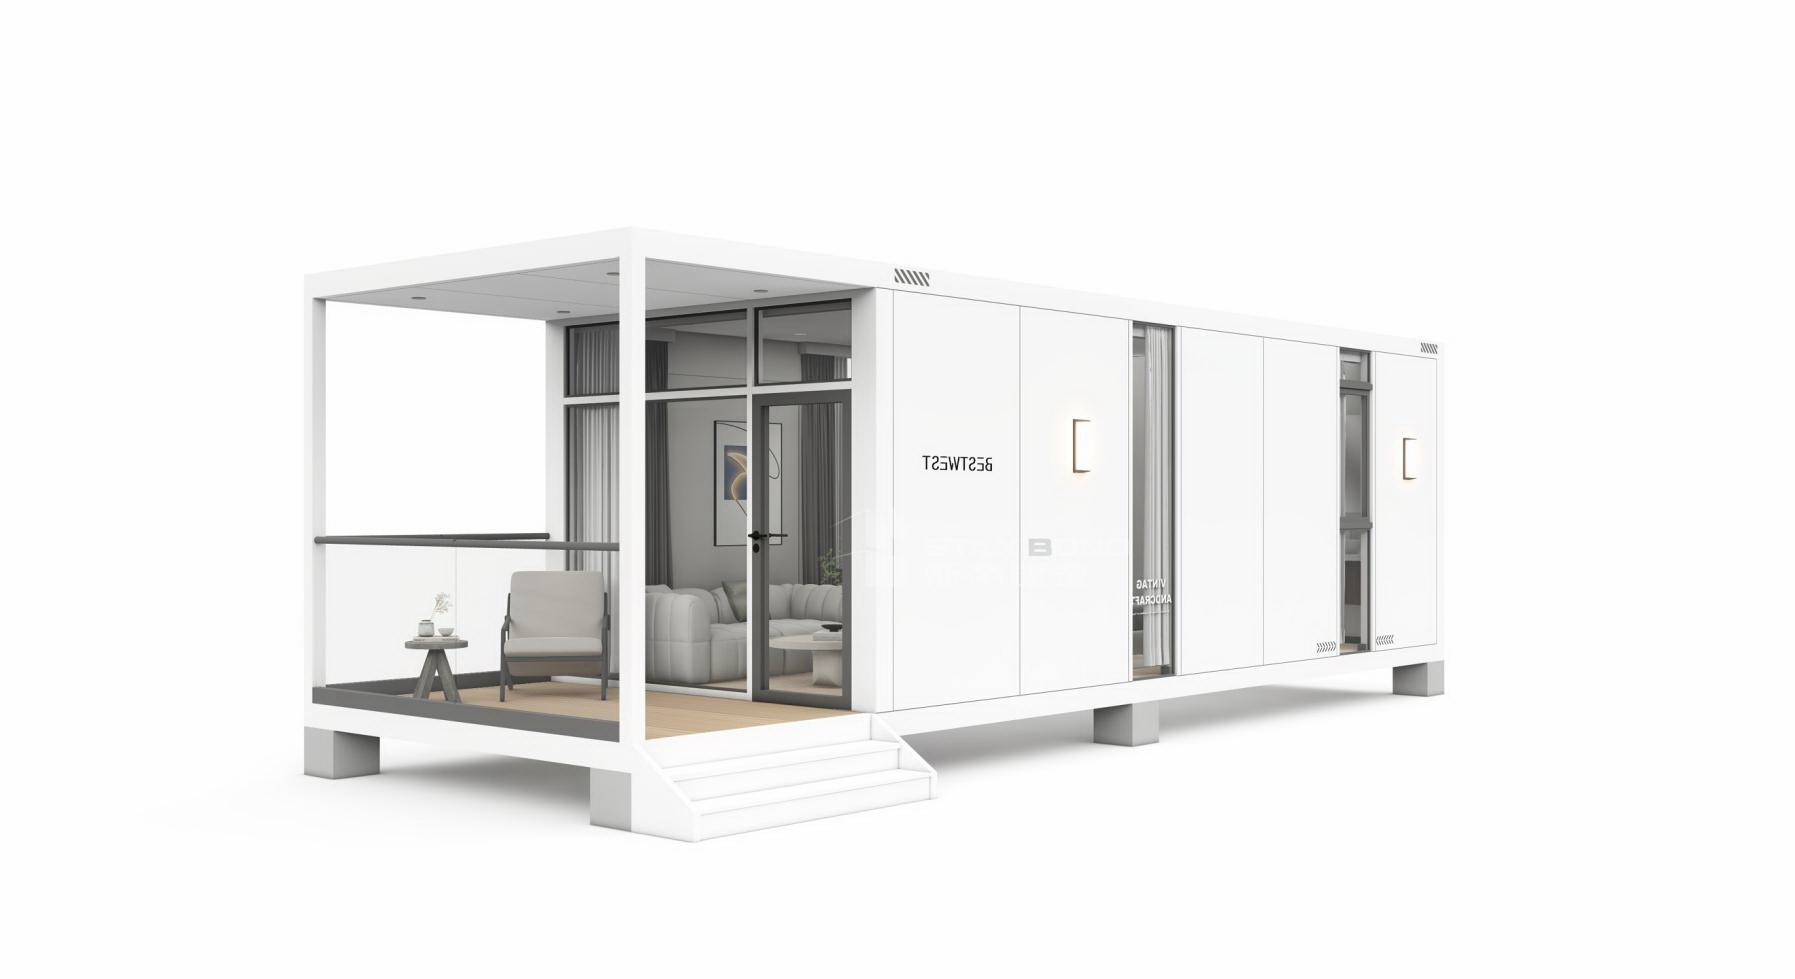 Modular Container Building Homestay · Residential Space